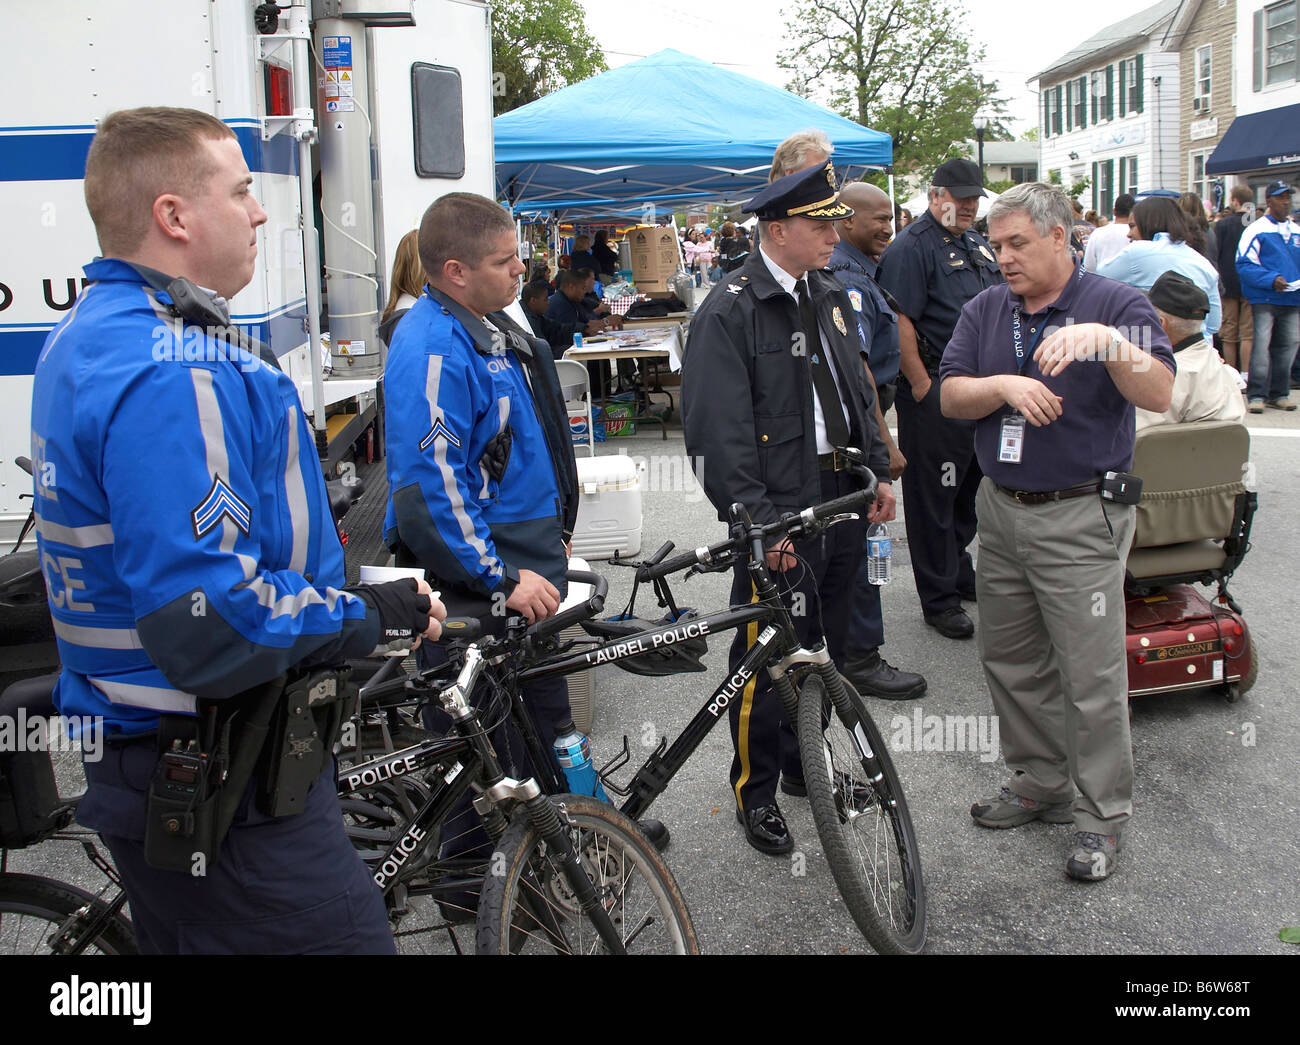 Police question a man at a festival in Laurel Maryland Stock Photo